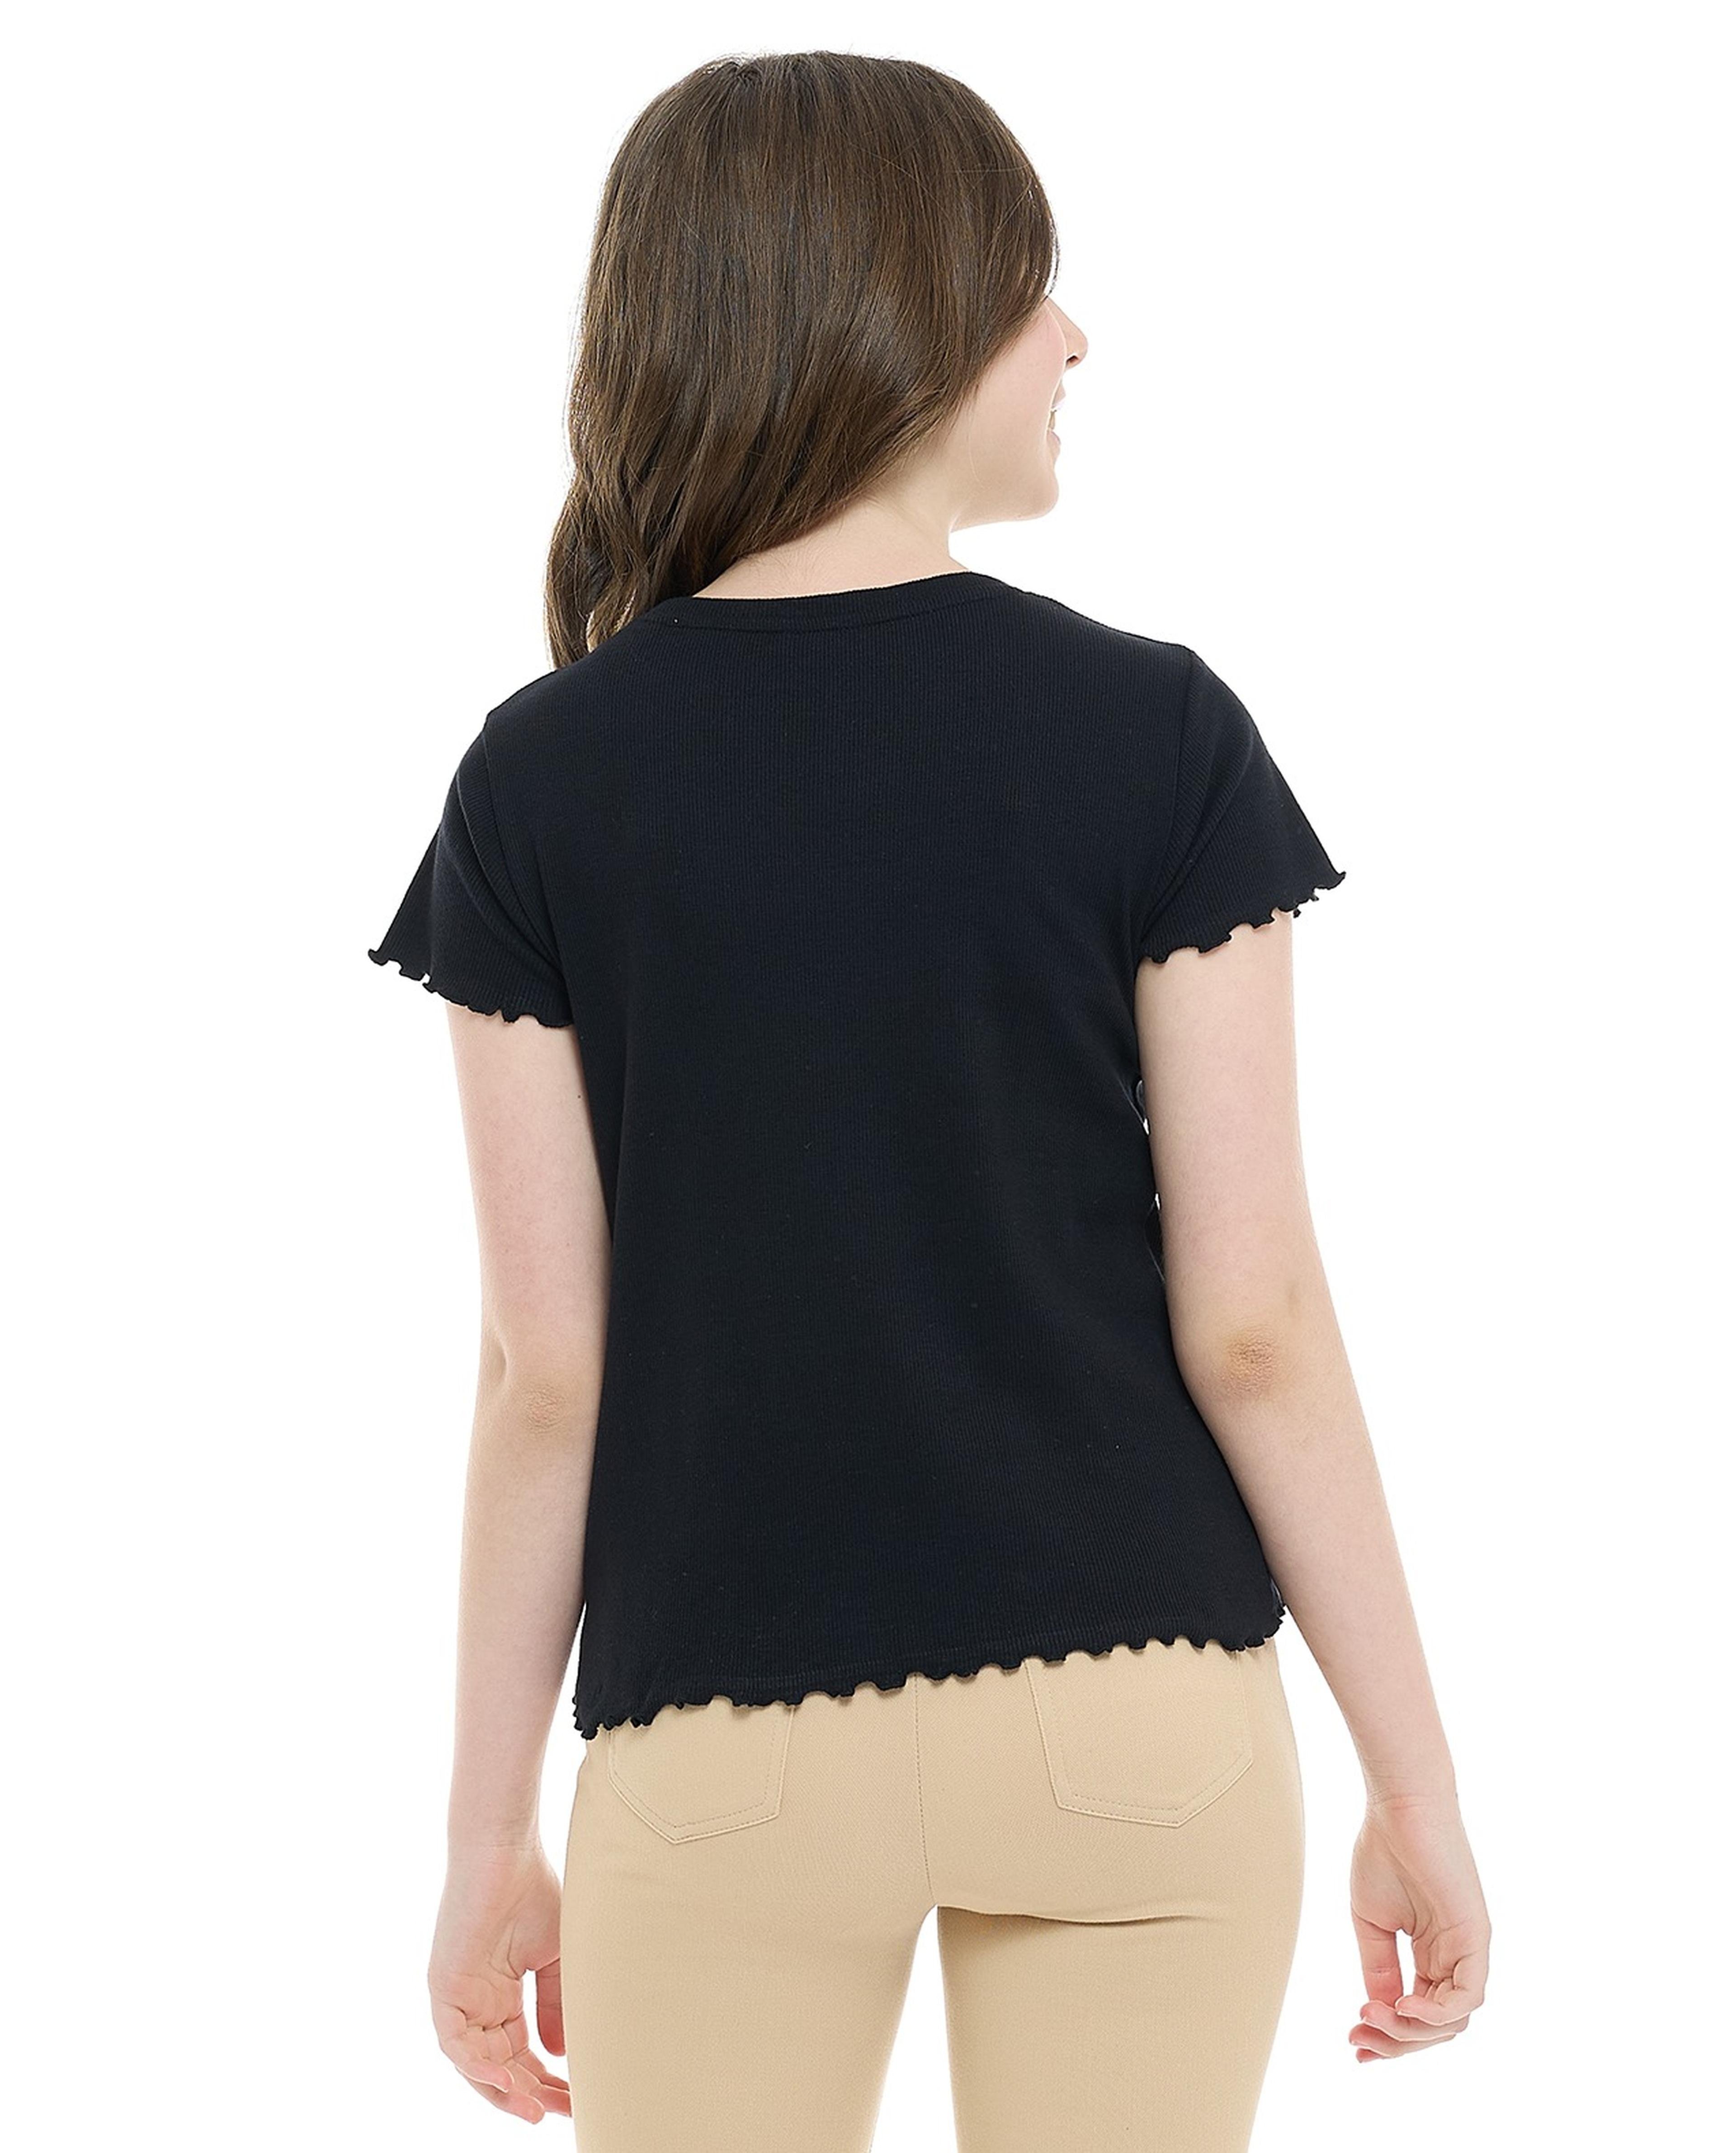 Studded Ribbed Top with Crew Neck and Short Sleeves